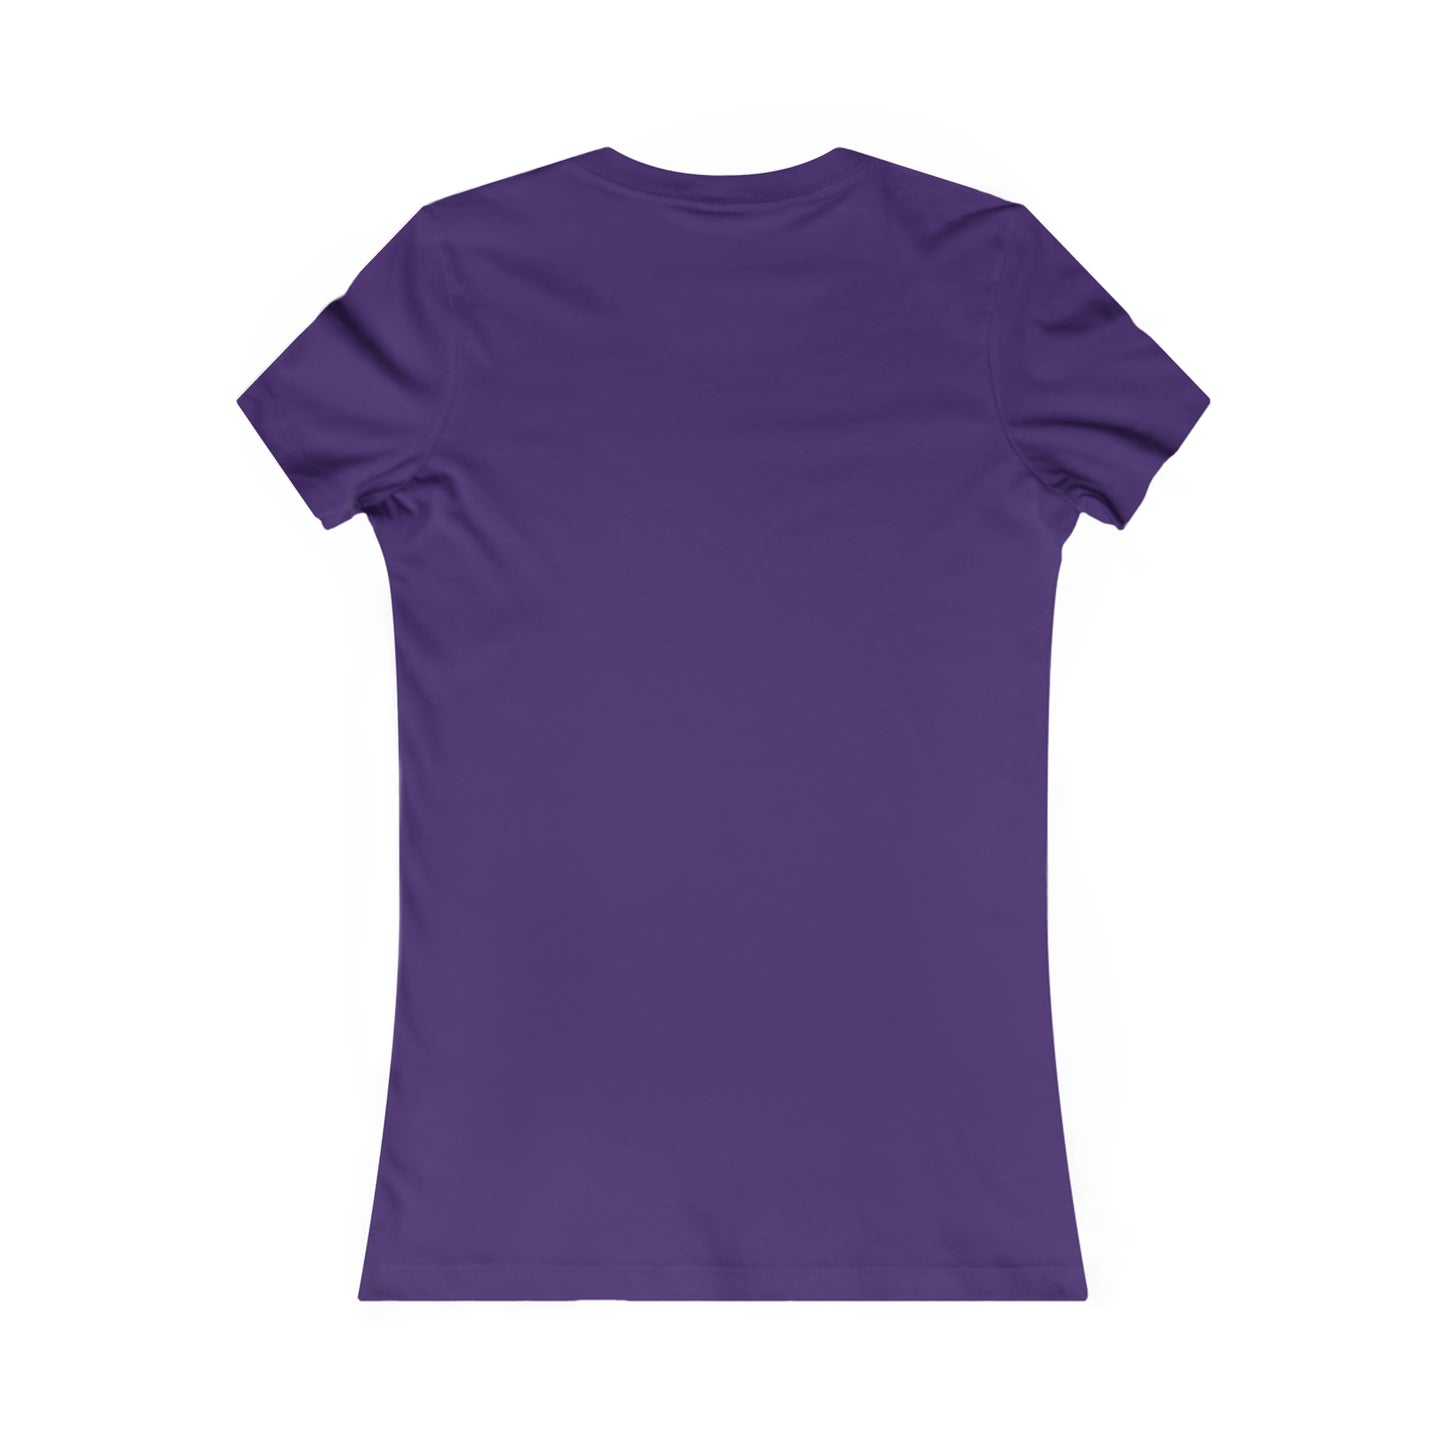 Flat back view of the purple shirt